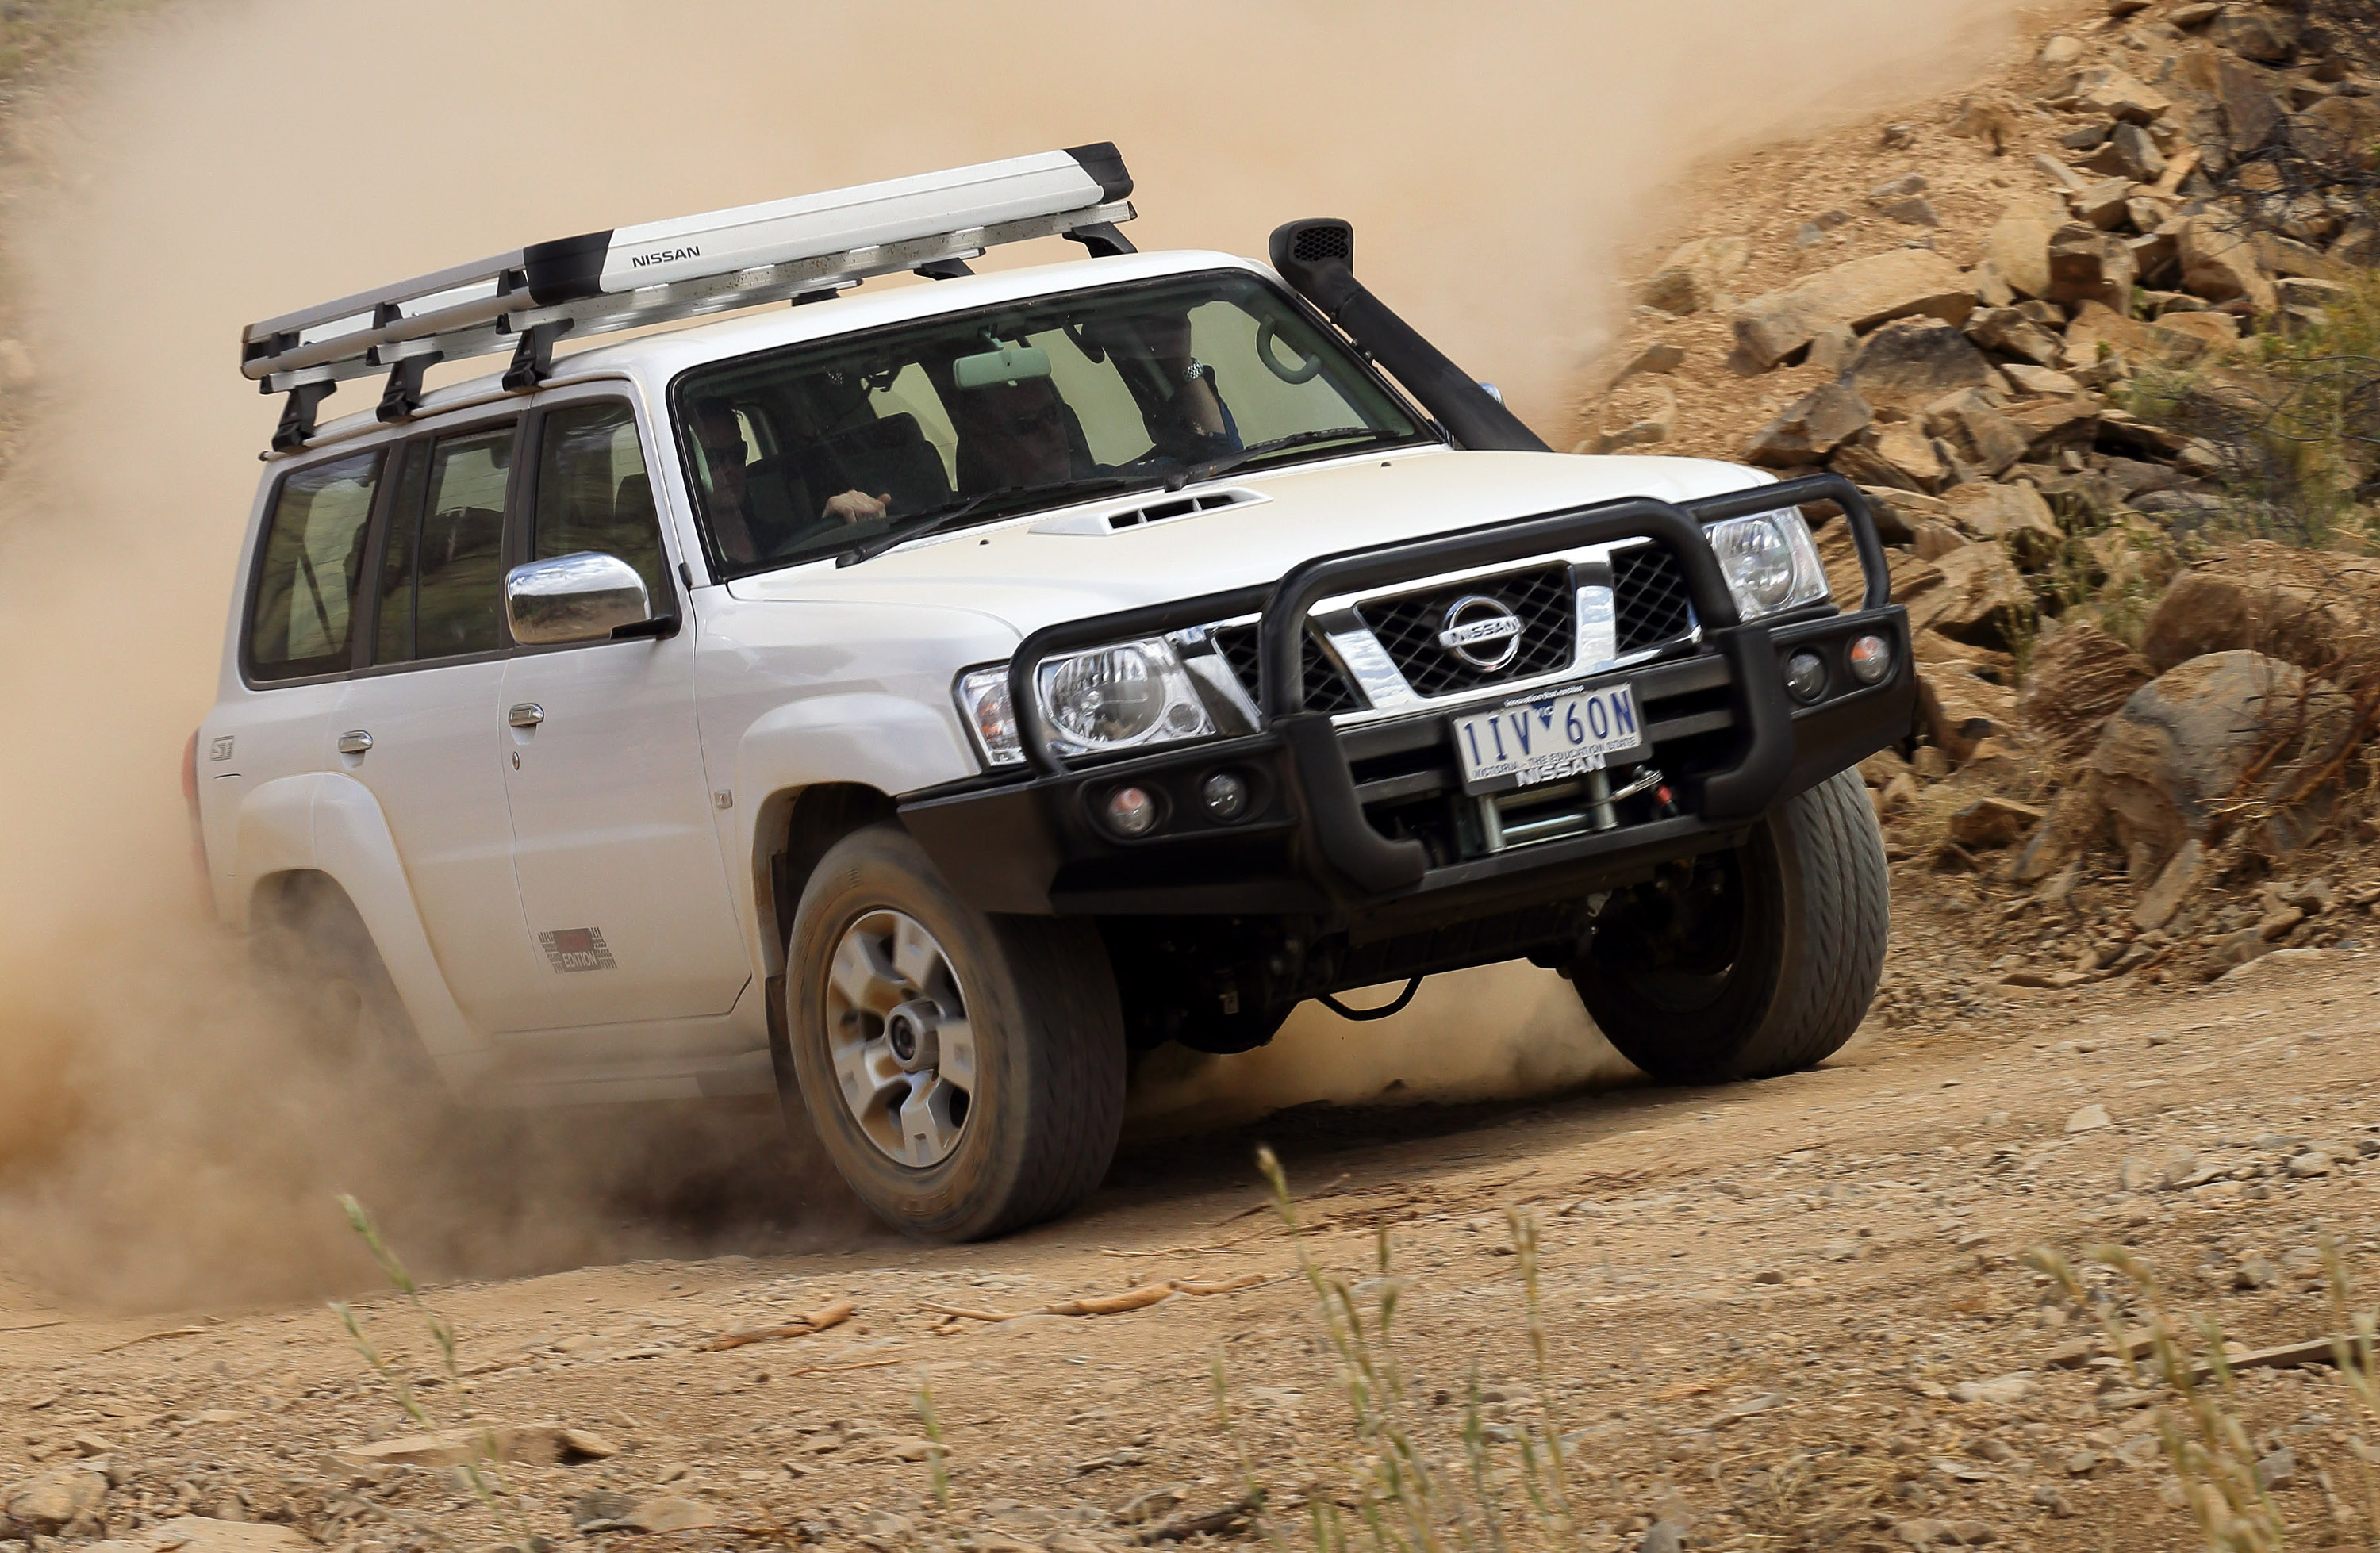 2016 Nissan Patrol Y61 Legend Edition review CarAdvice